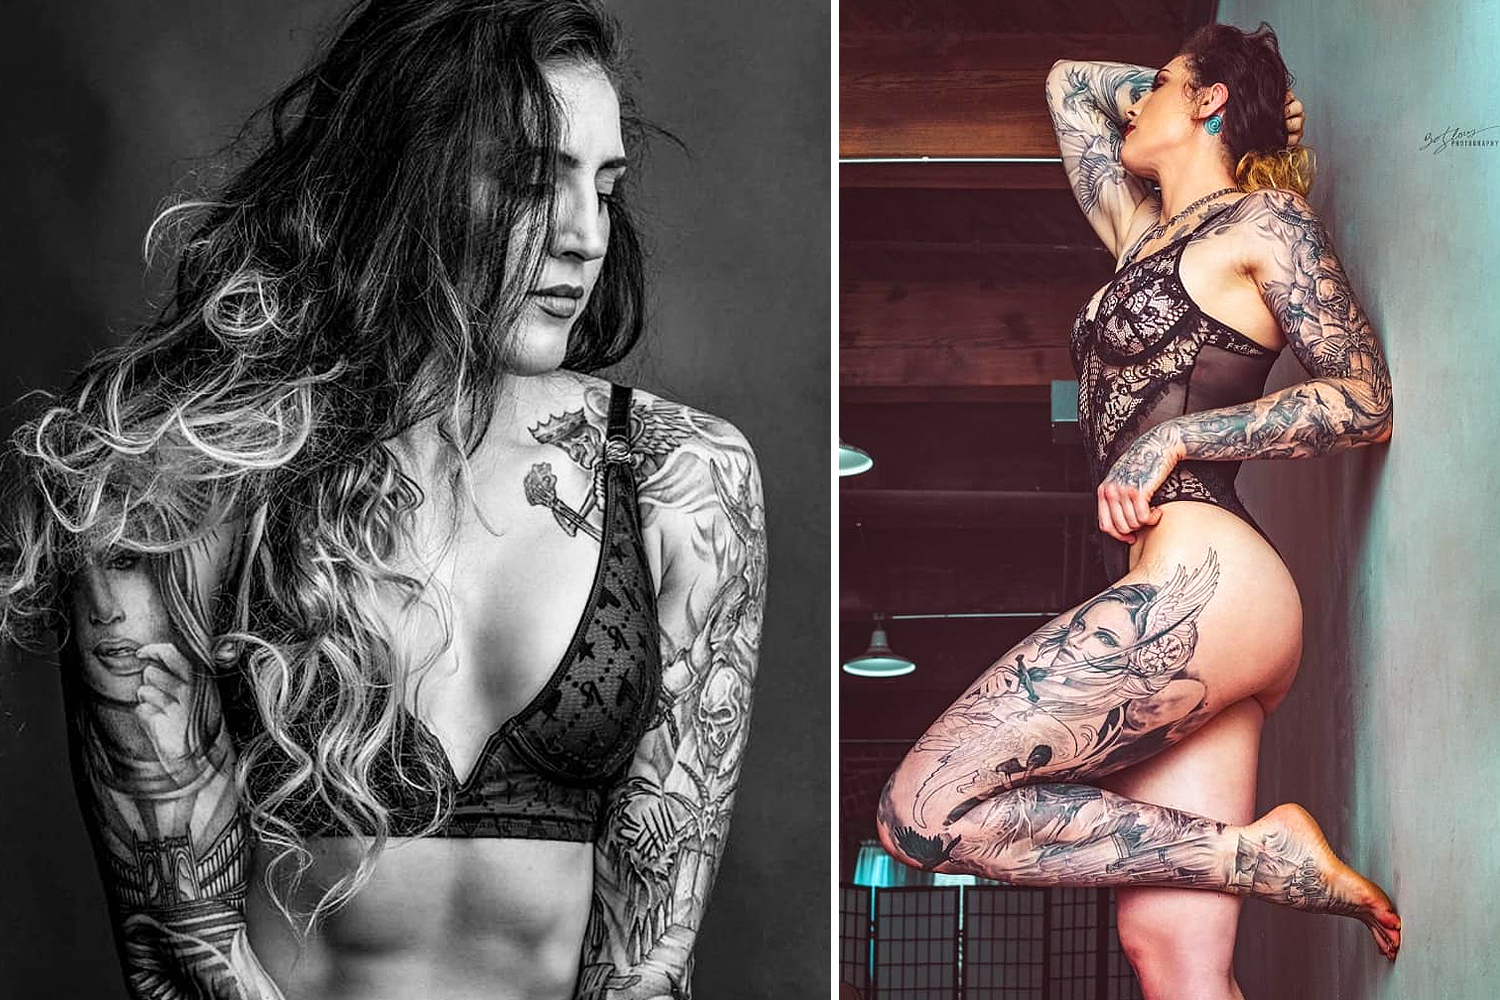 brian smuin add megan anderson naked photo